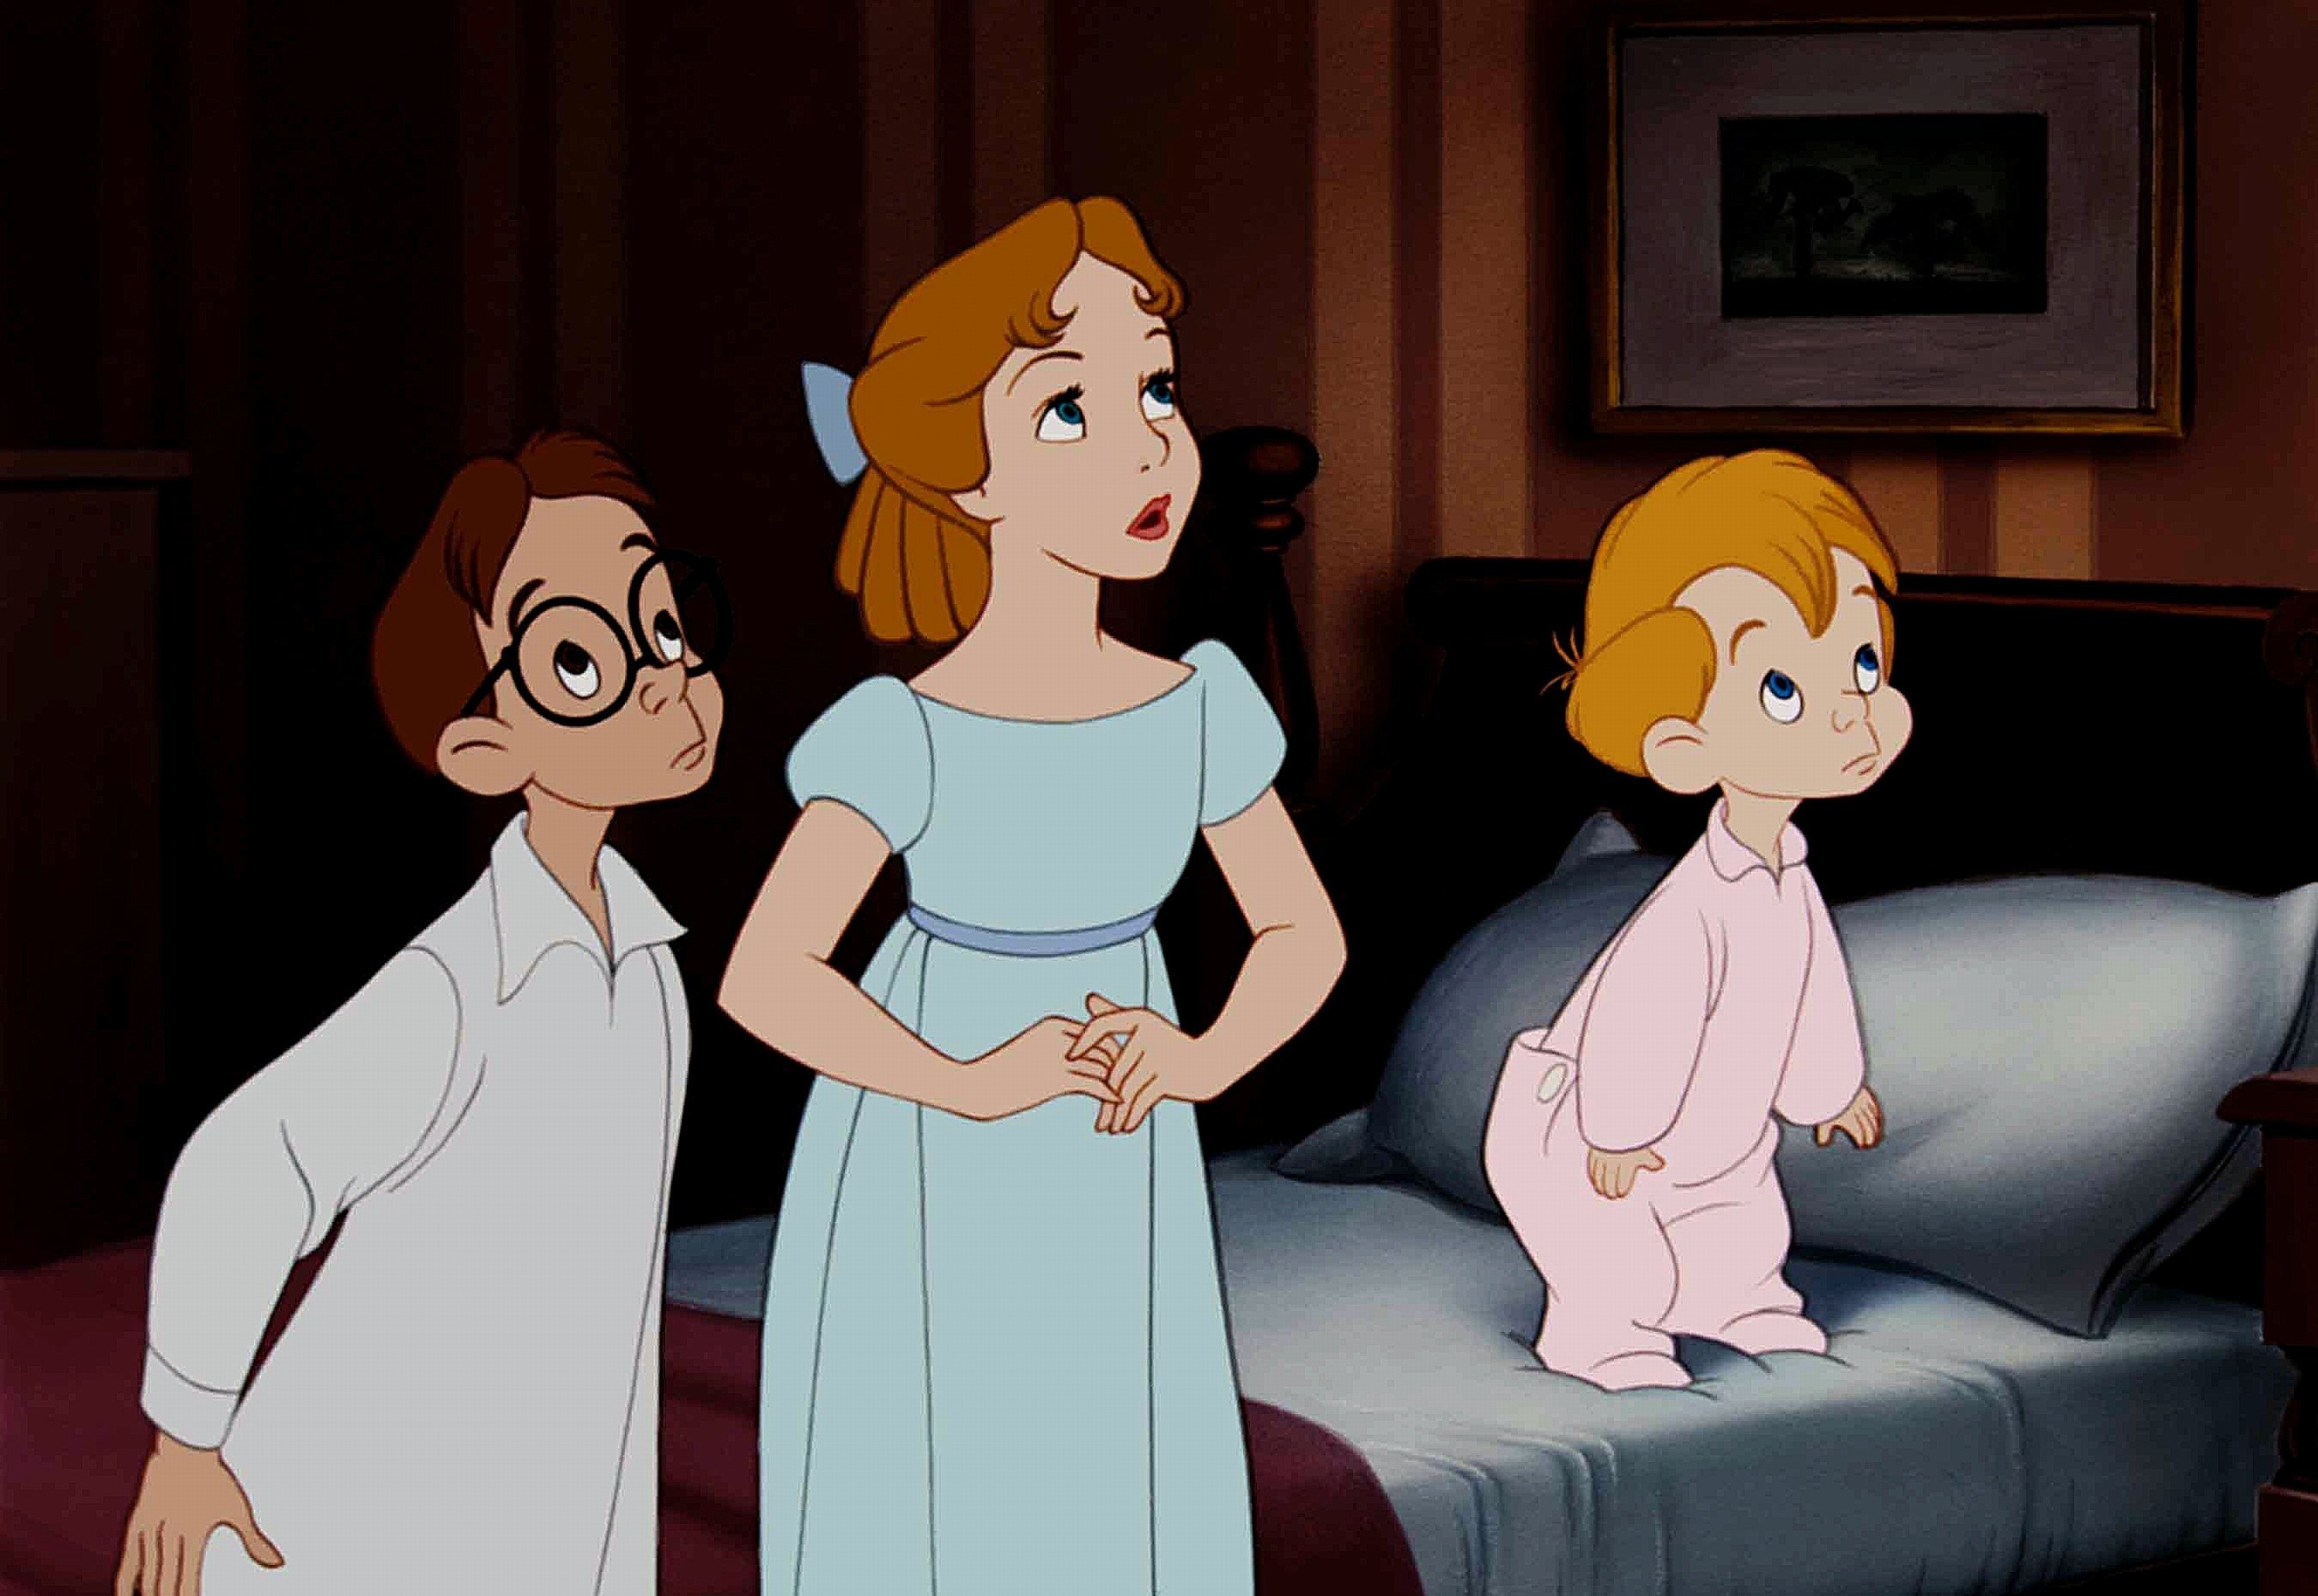 John, Wendy and Michael in the animated version of Peter Pan